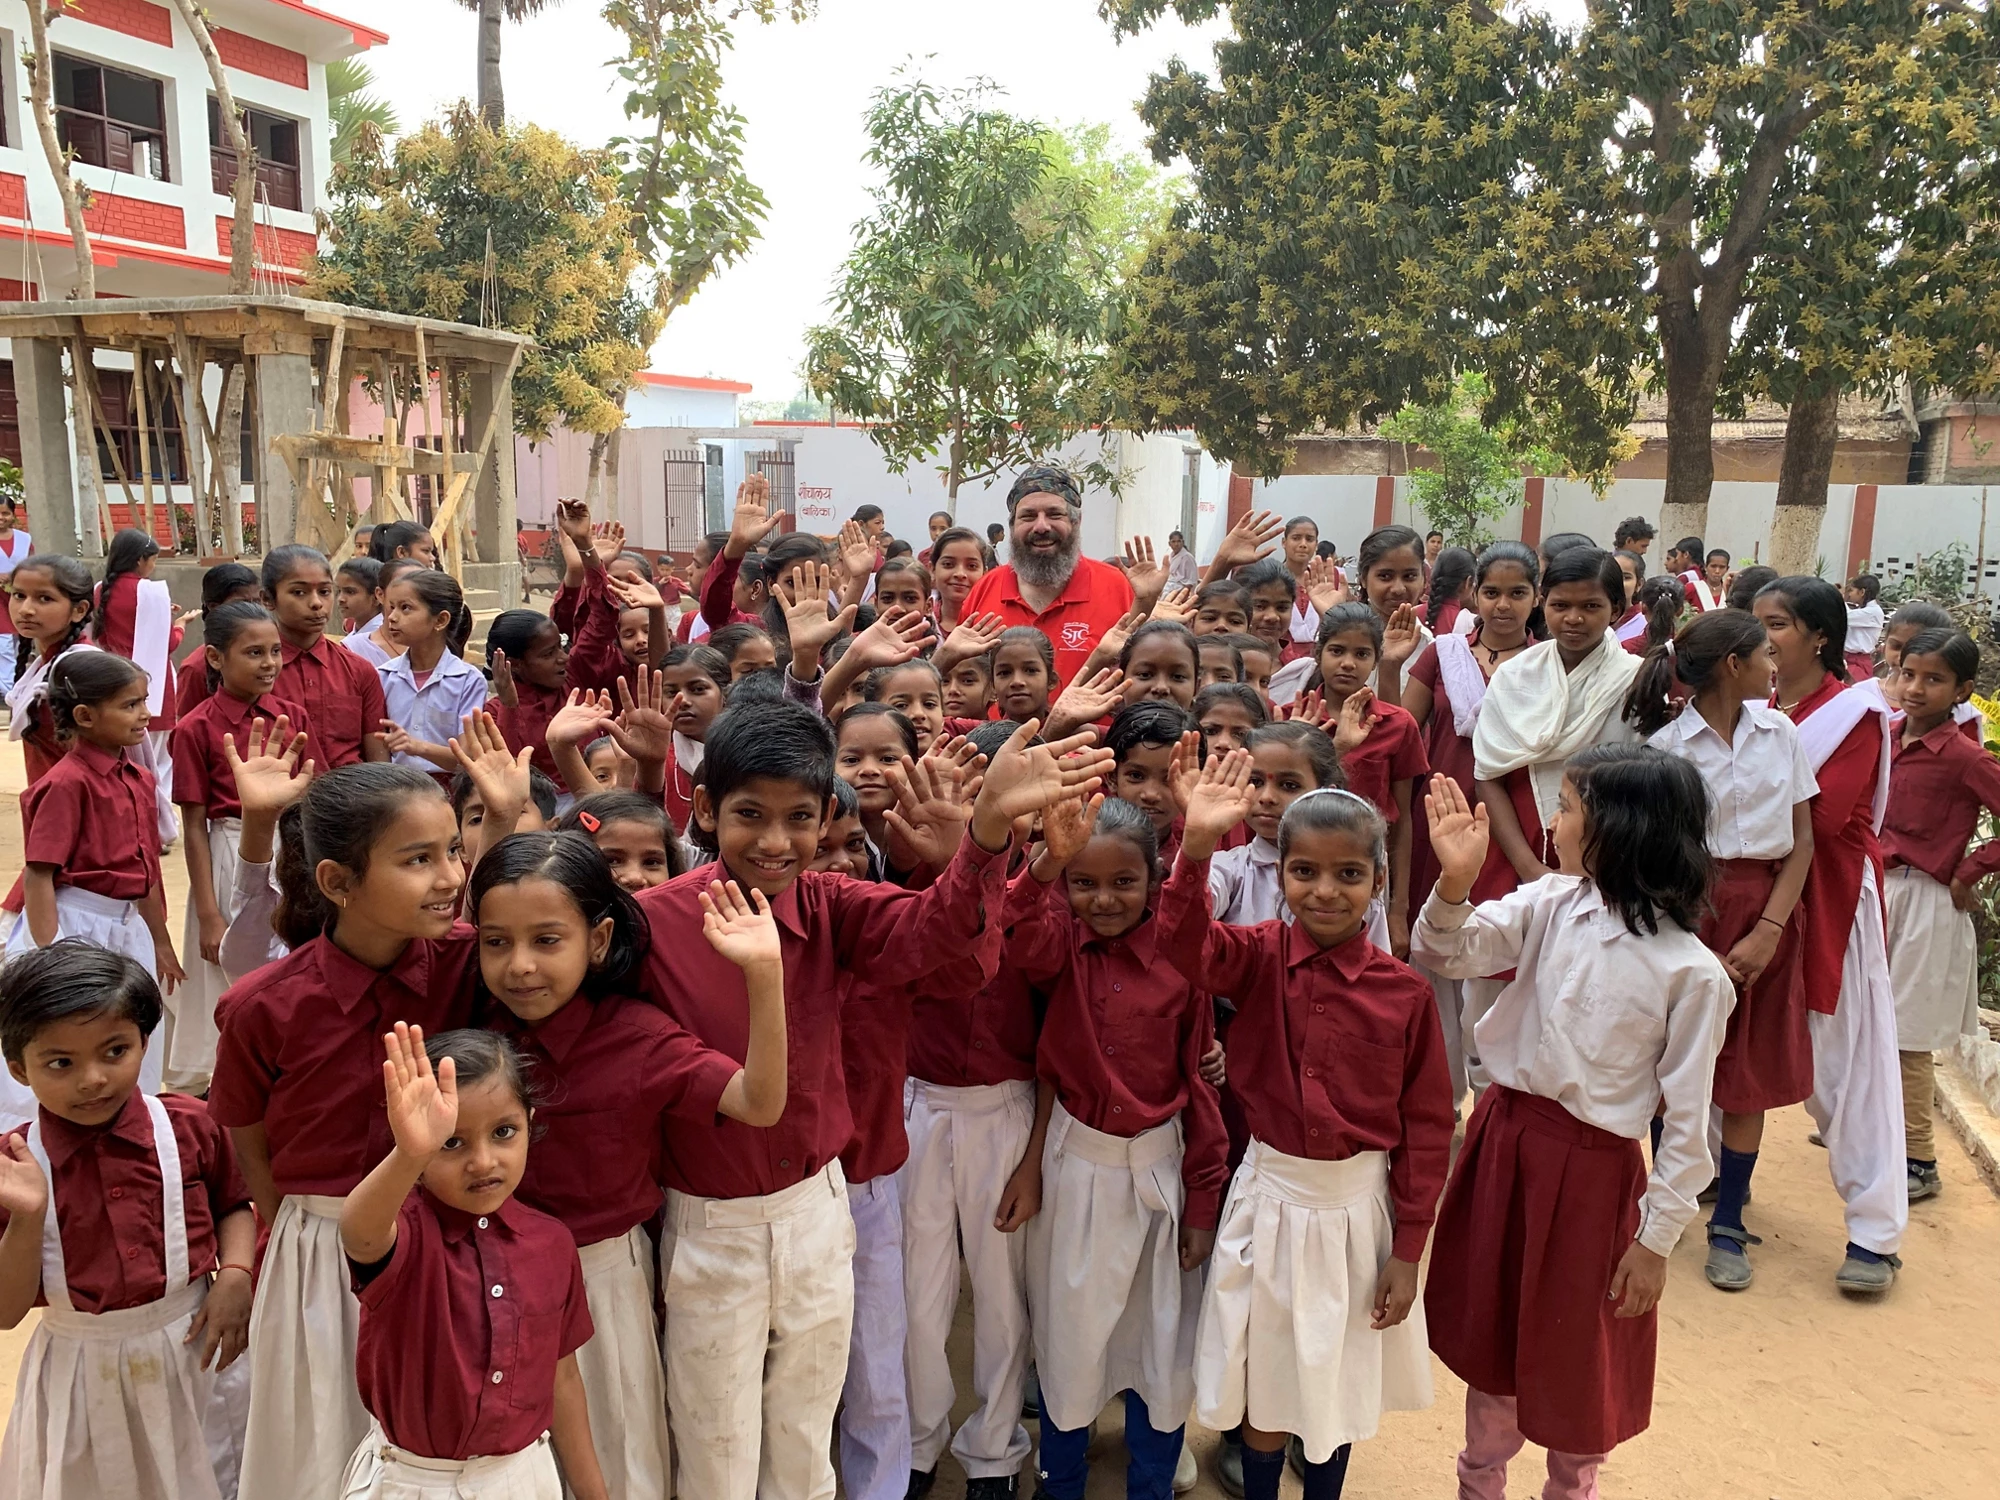 The author with students at S.P. Singh School in Dalippur, Bihar. © Alok Singh/World Bank